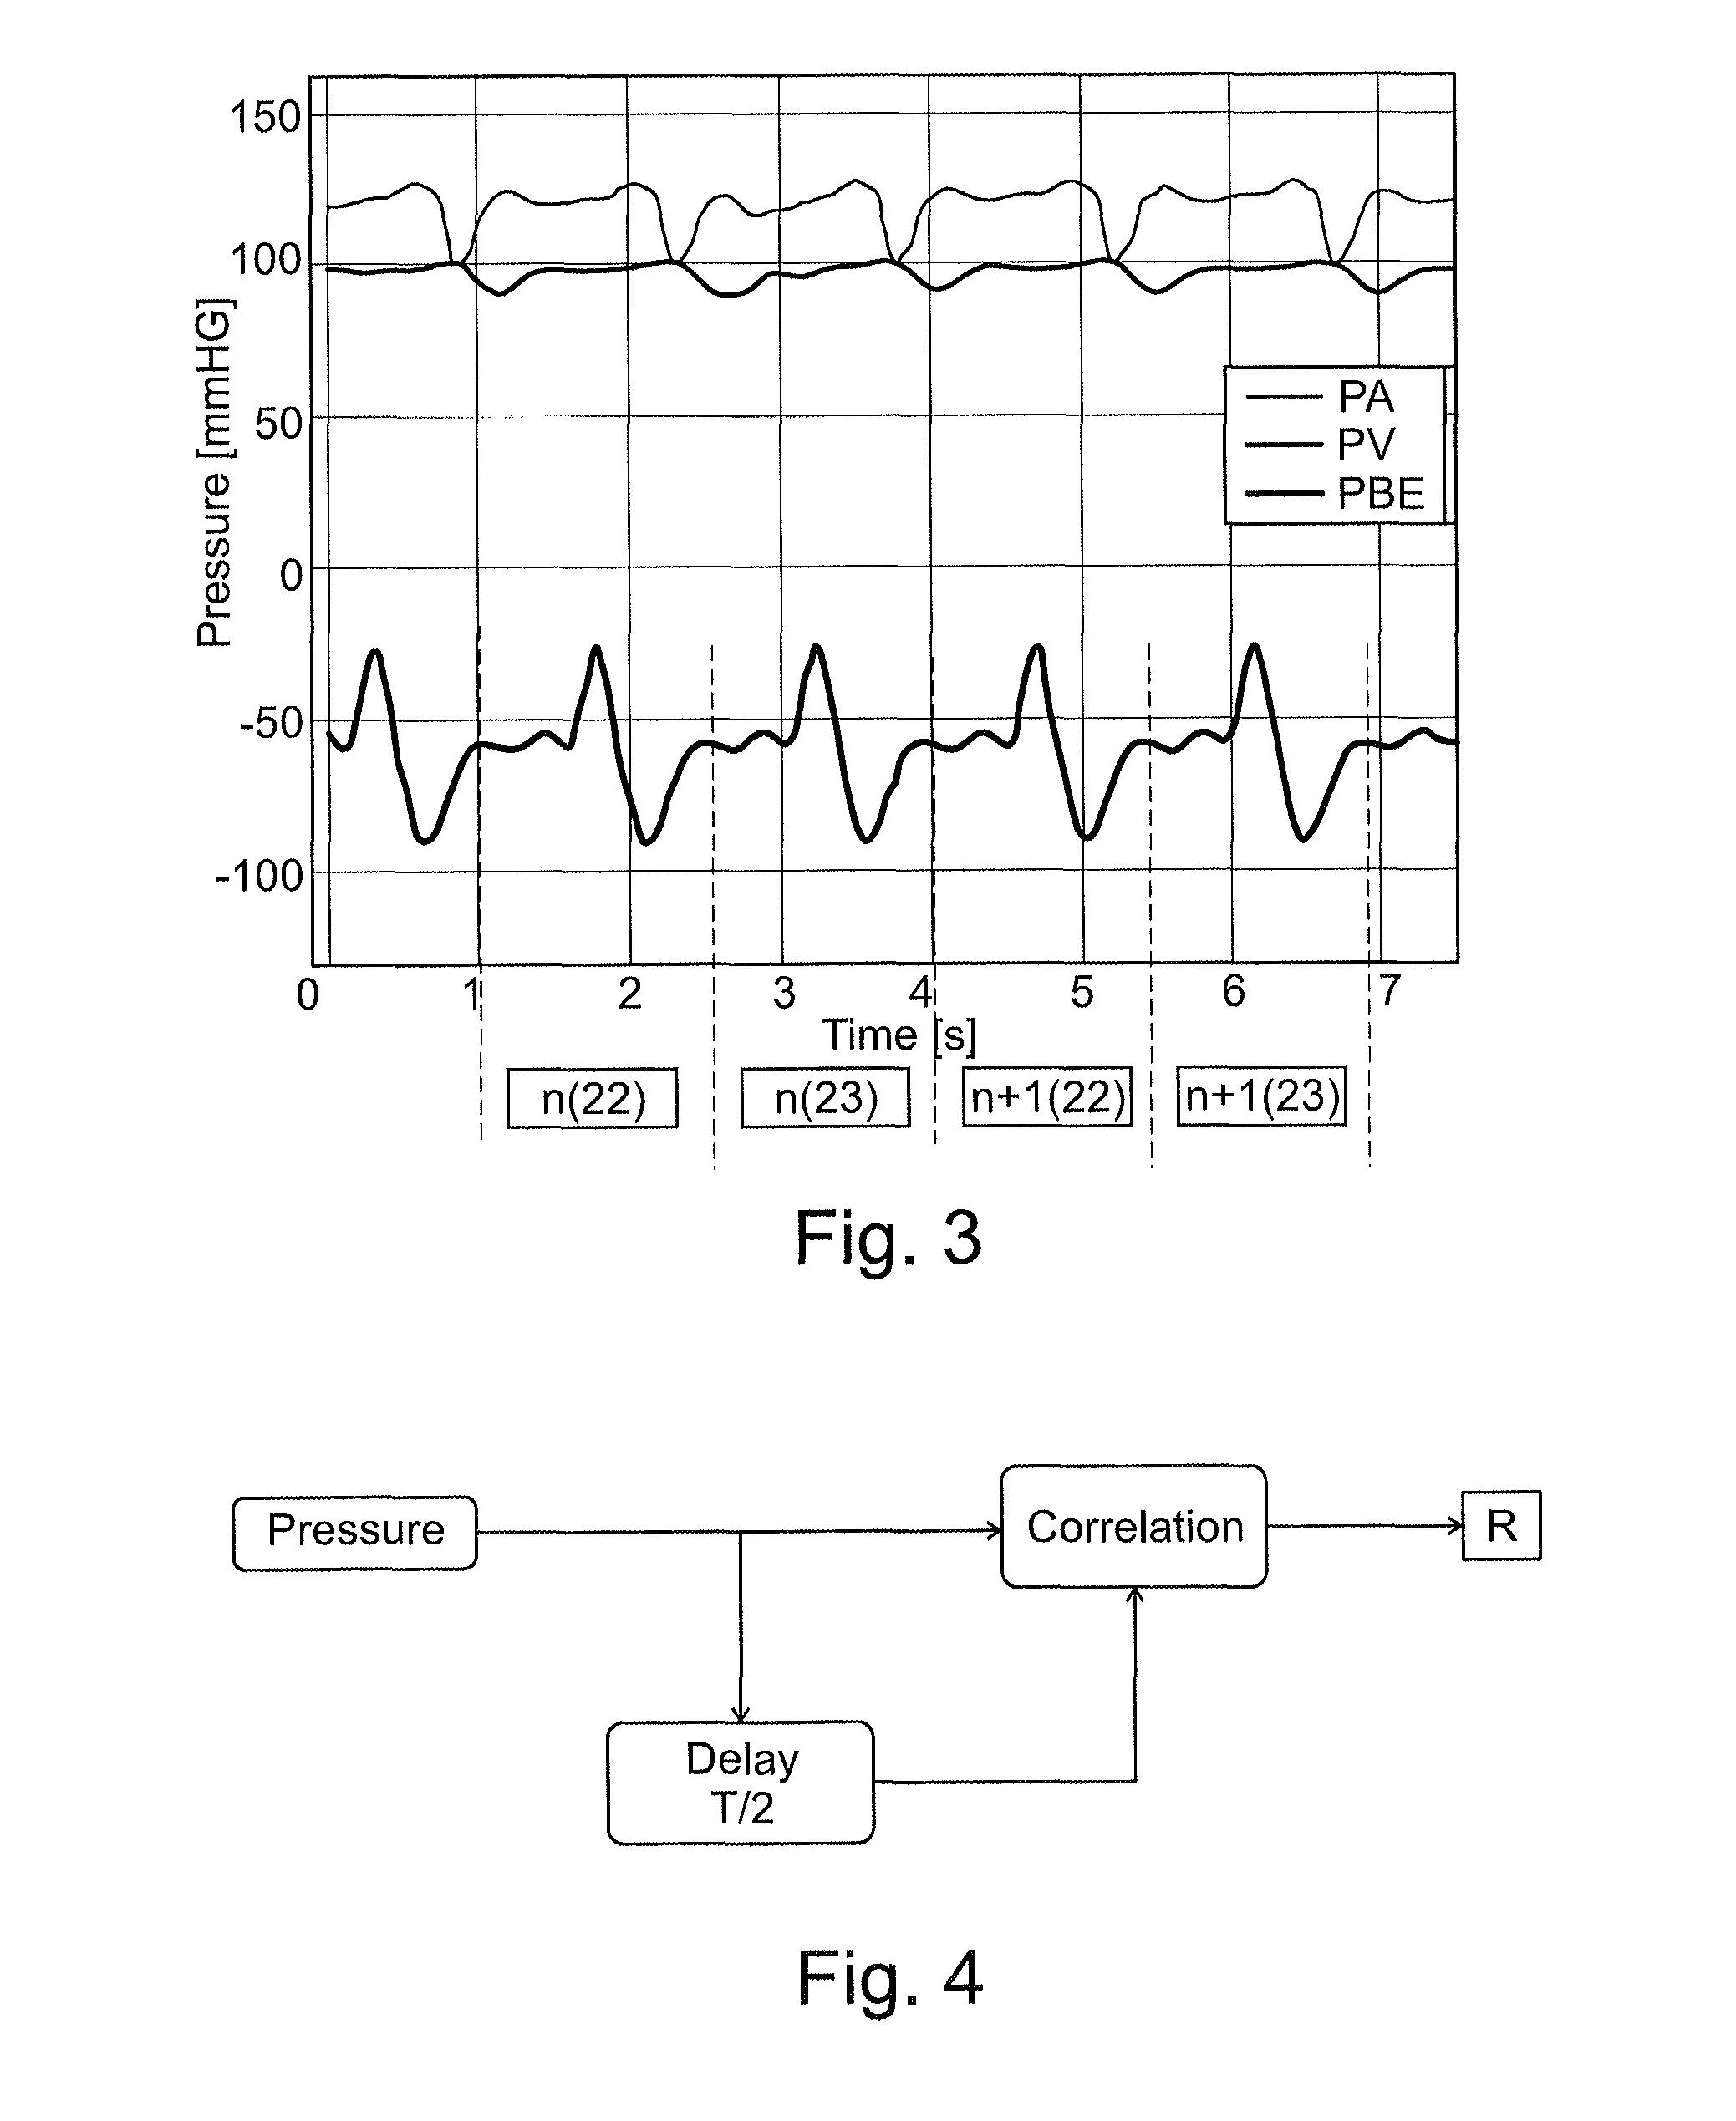 Fluid conveyance monitoring system in an extracorporeal blood treatment device